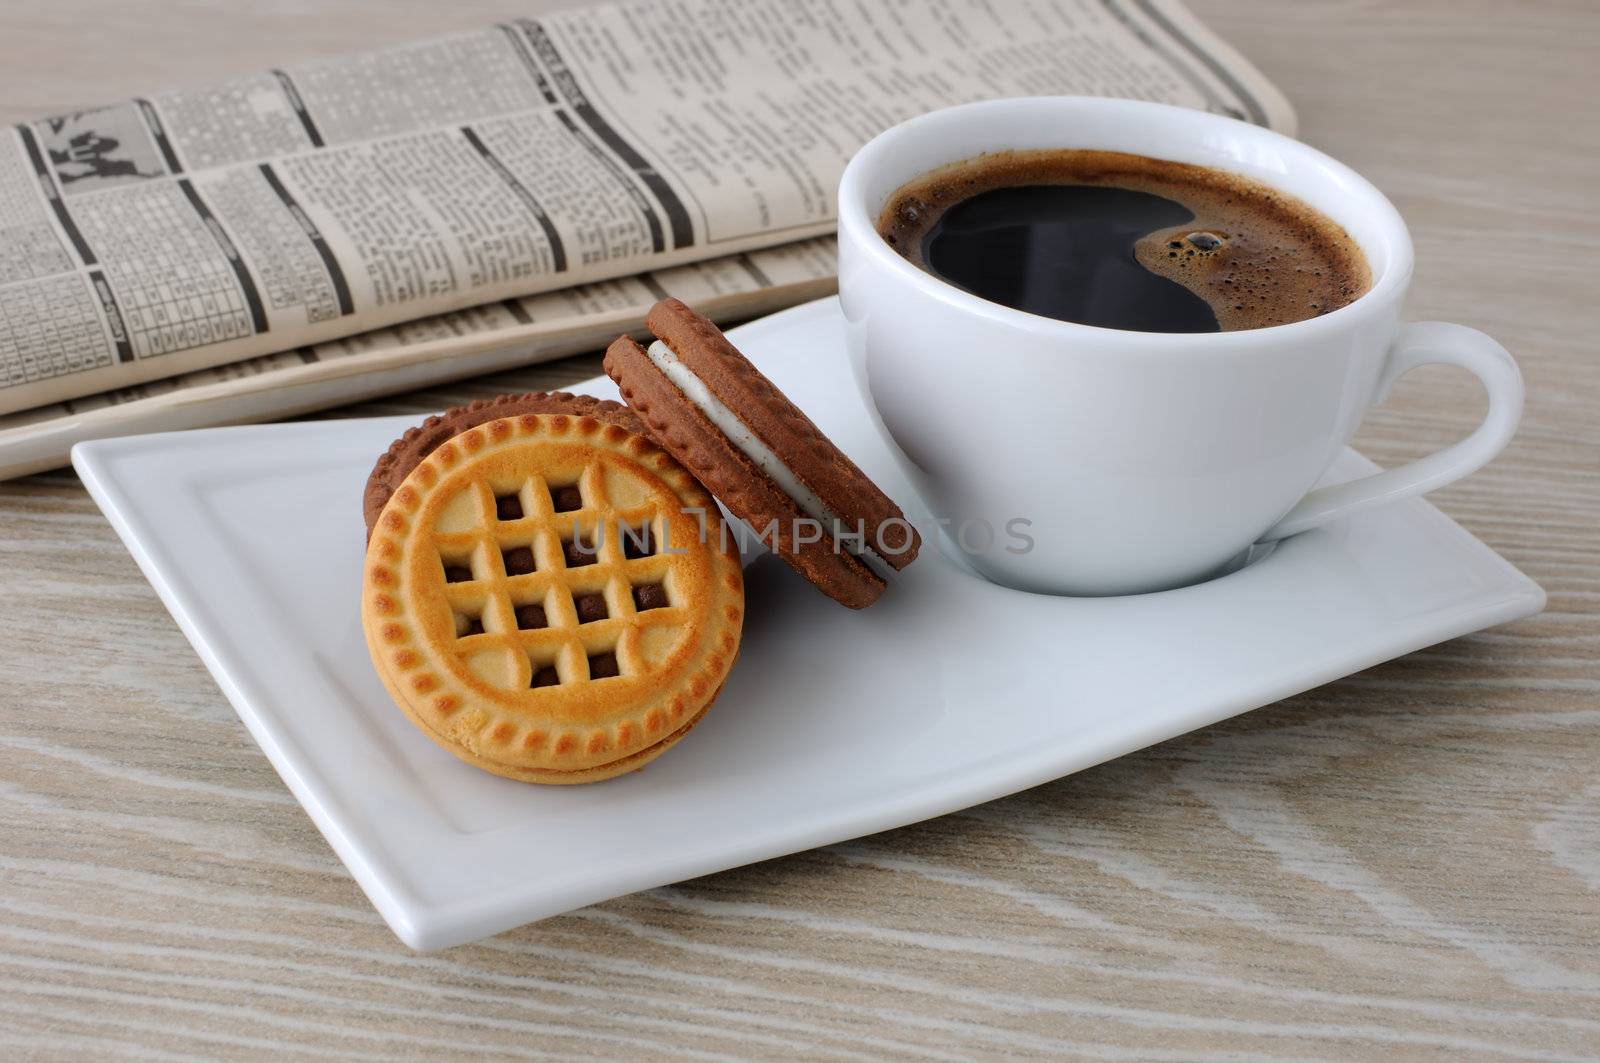 A cup of fresh brewed coffee and biscuits on the table with newspaper